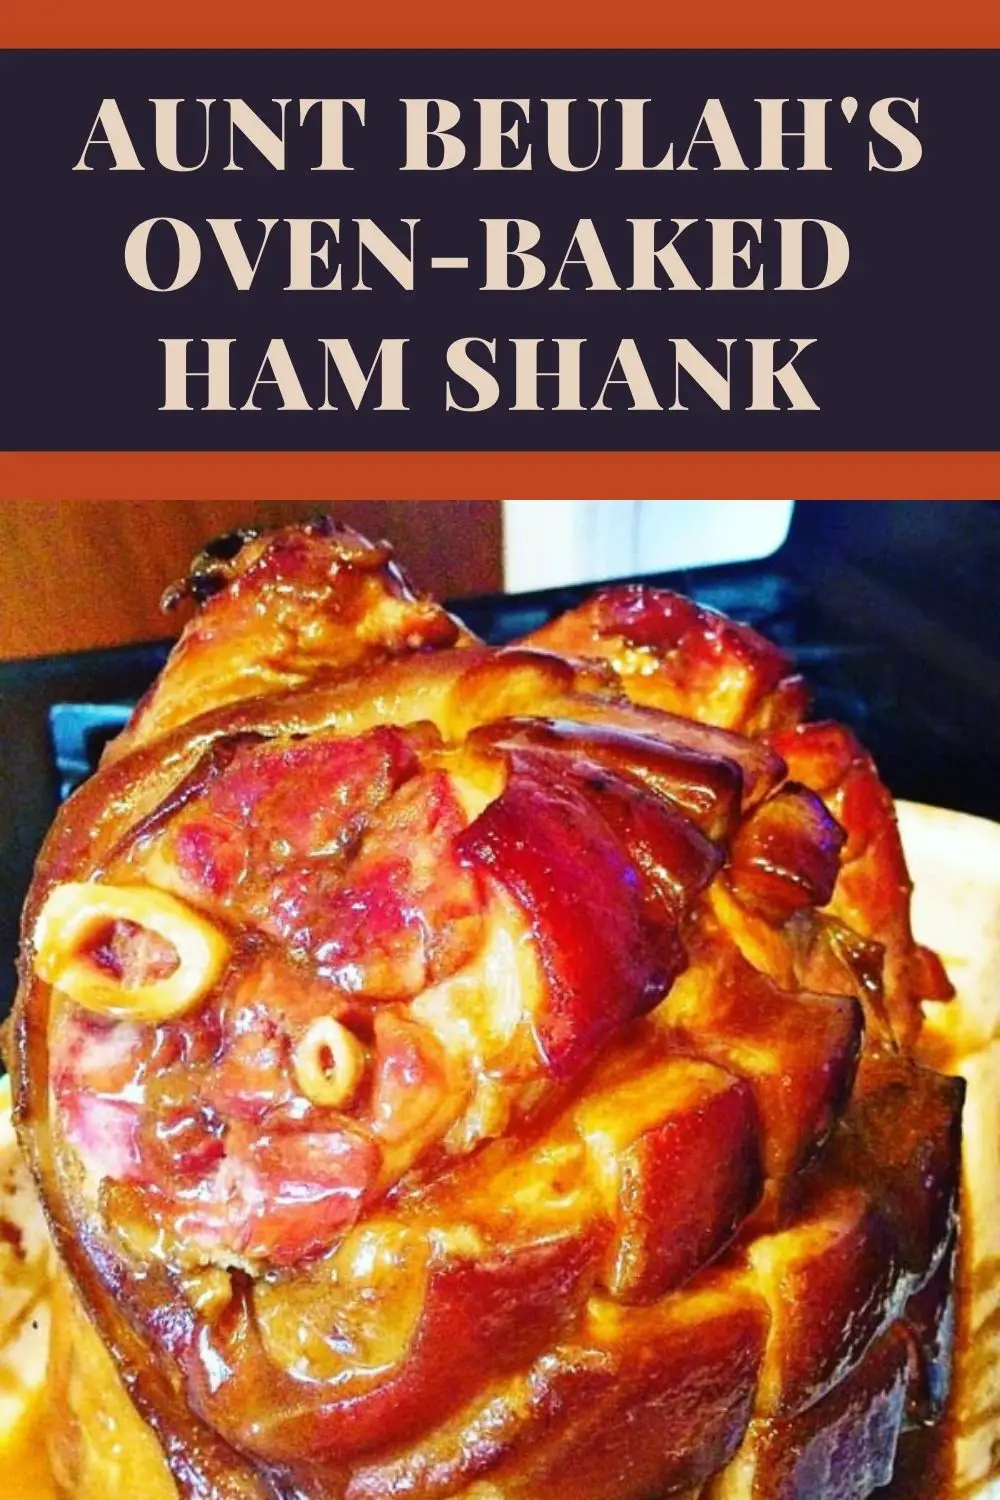 How to Bake a Ham Shank in the Oven (Aunt Beulah's Ham)